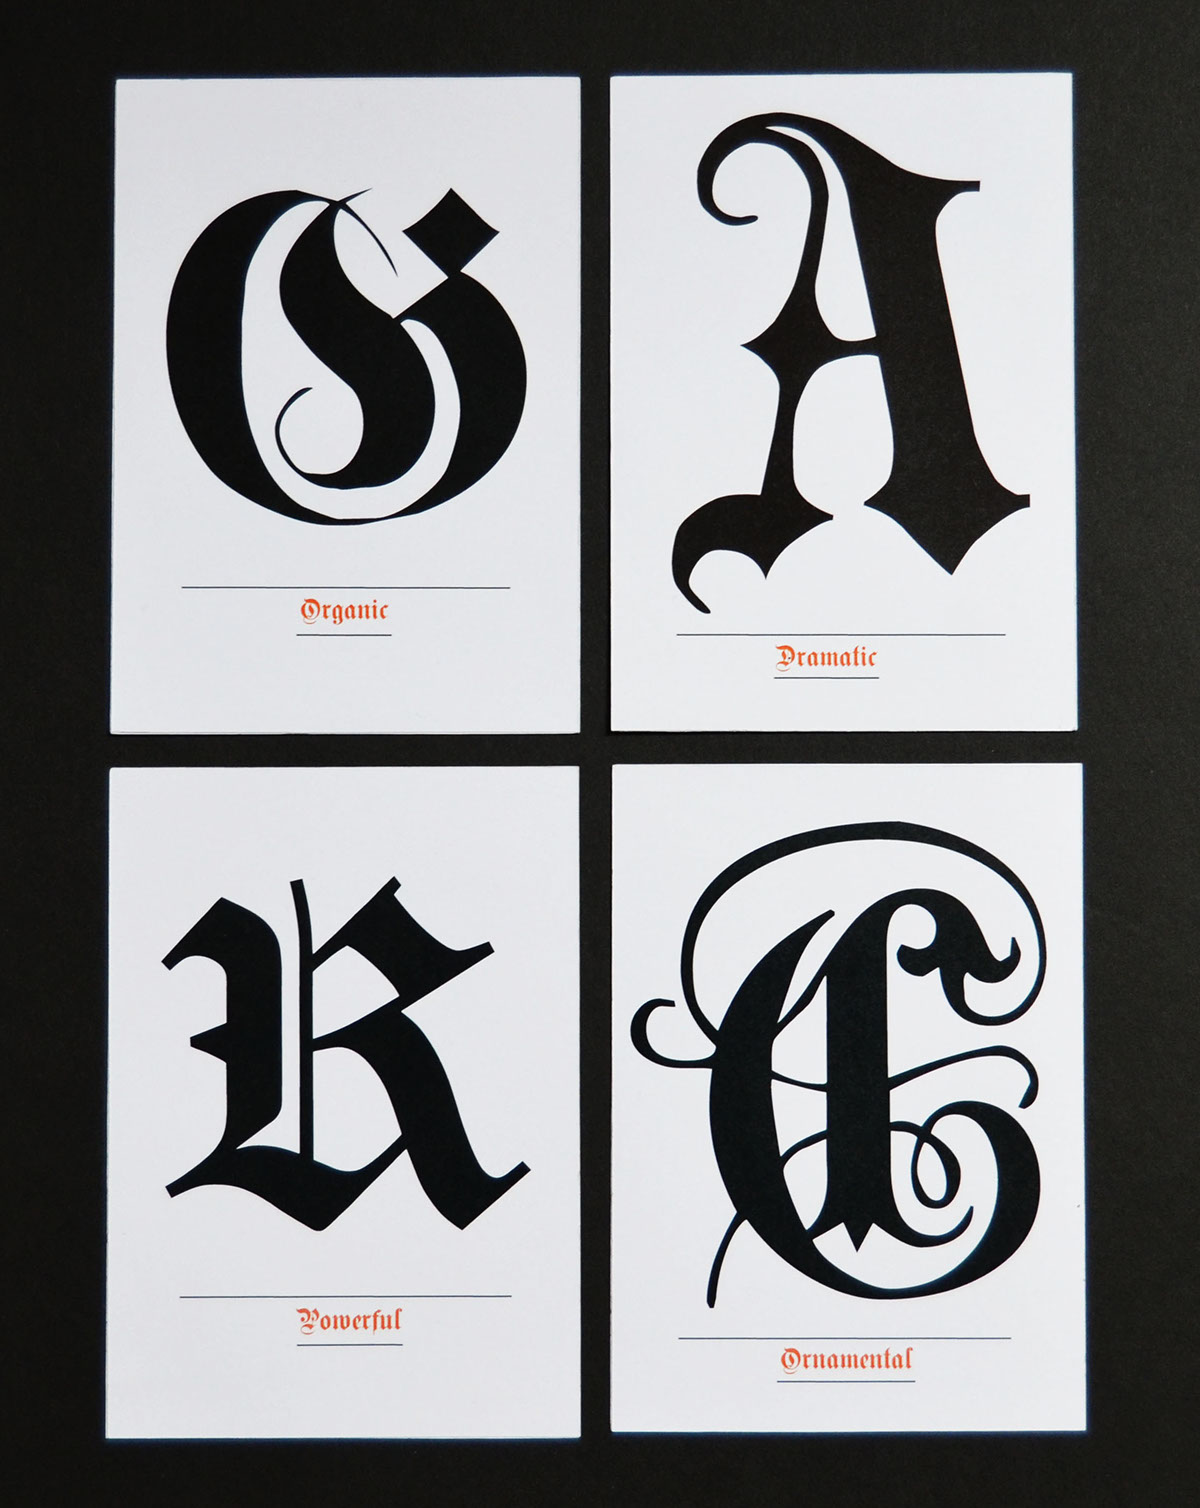 Blackletter editorial exhibition promotion